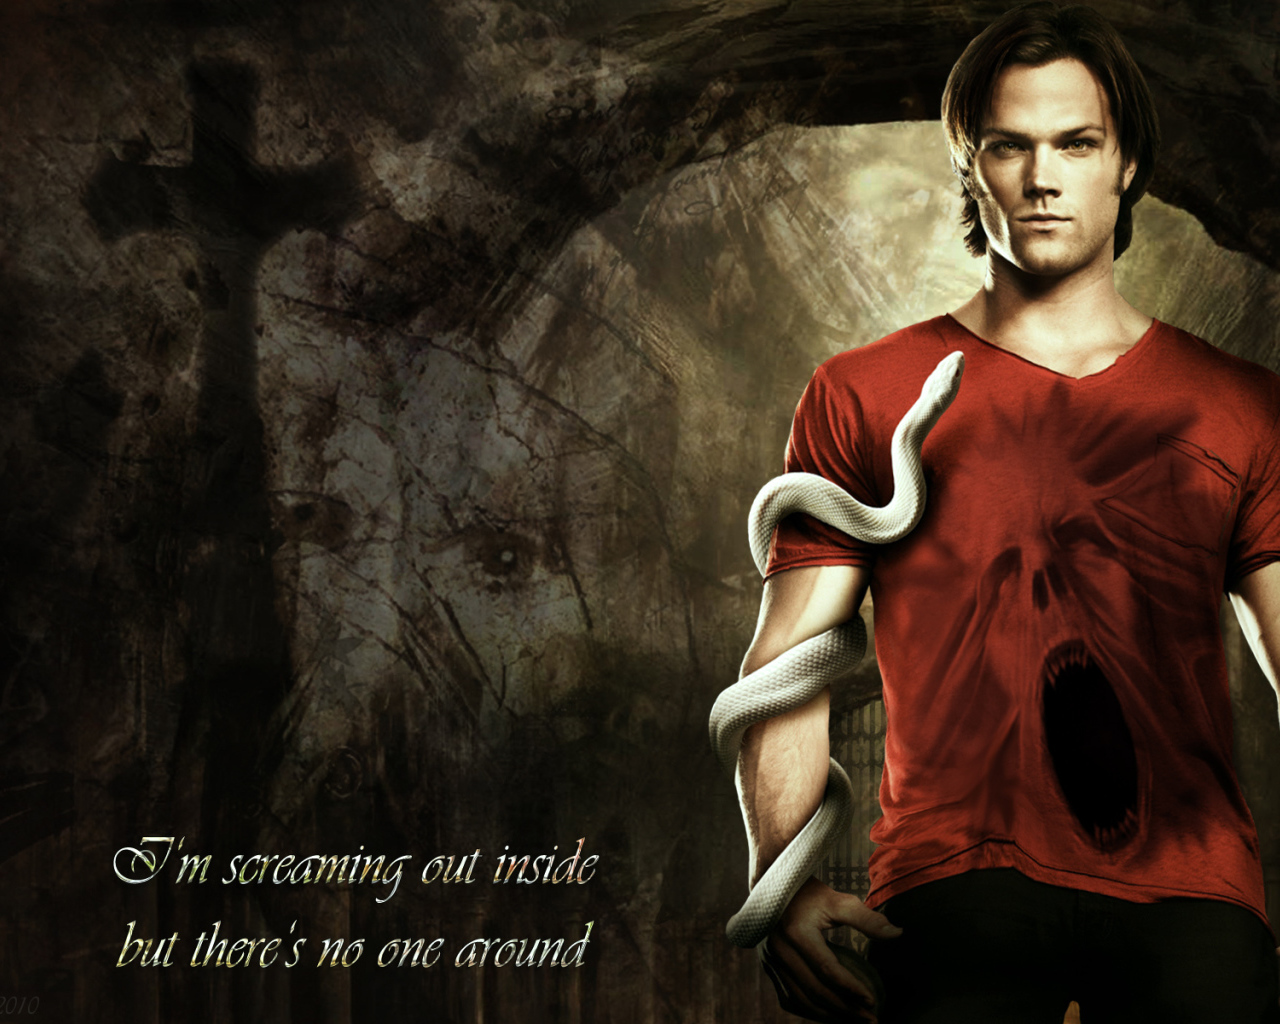 Sam the snake from the show Supernatural